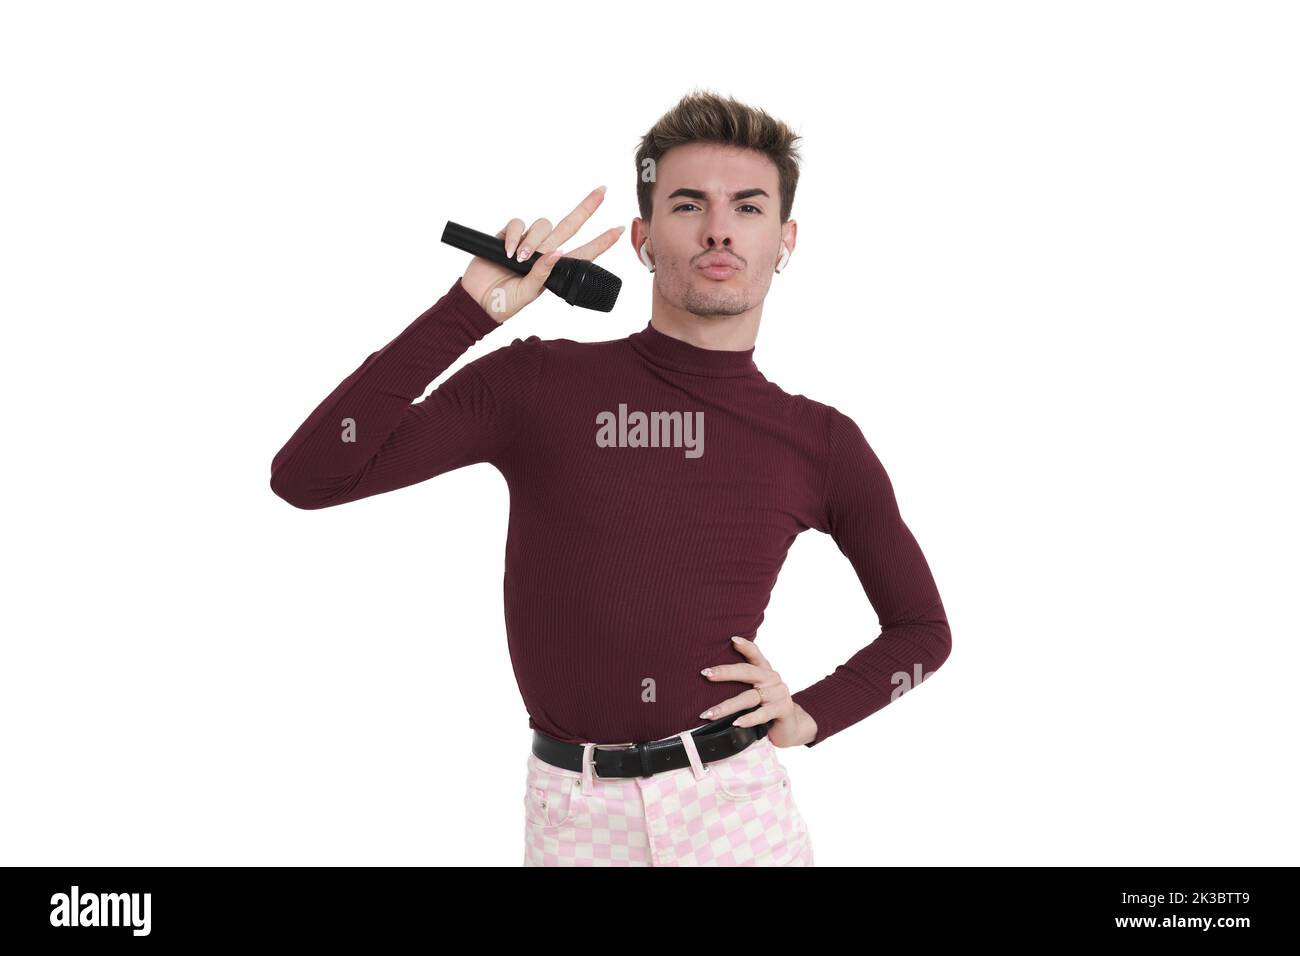 Young caucasian man posing with a microphone, isolated. Stock Photo